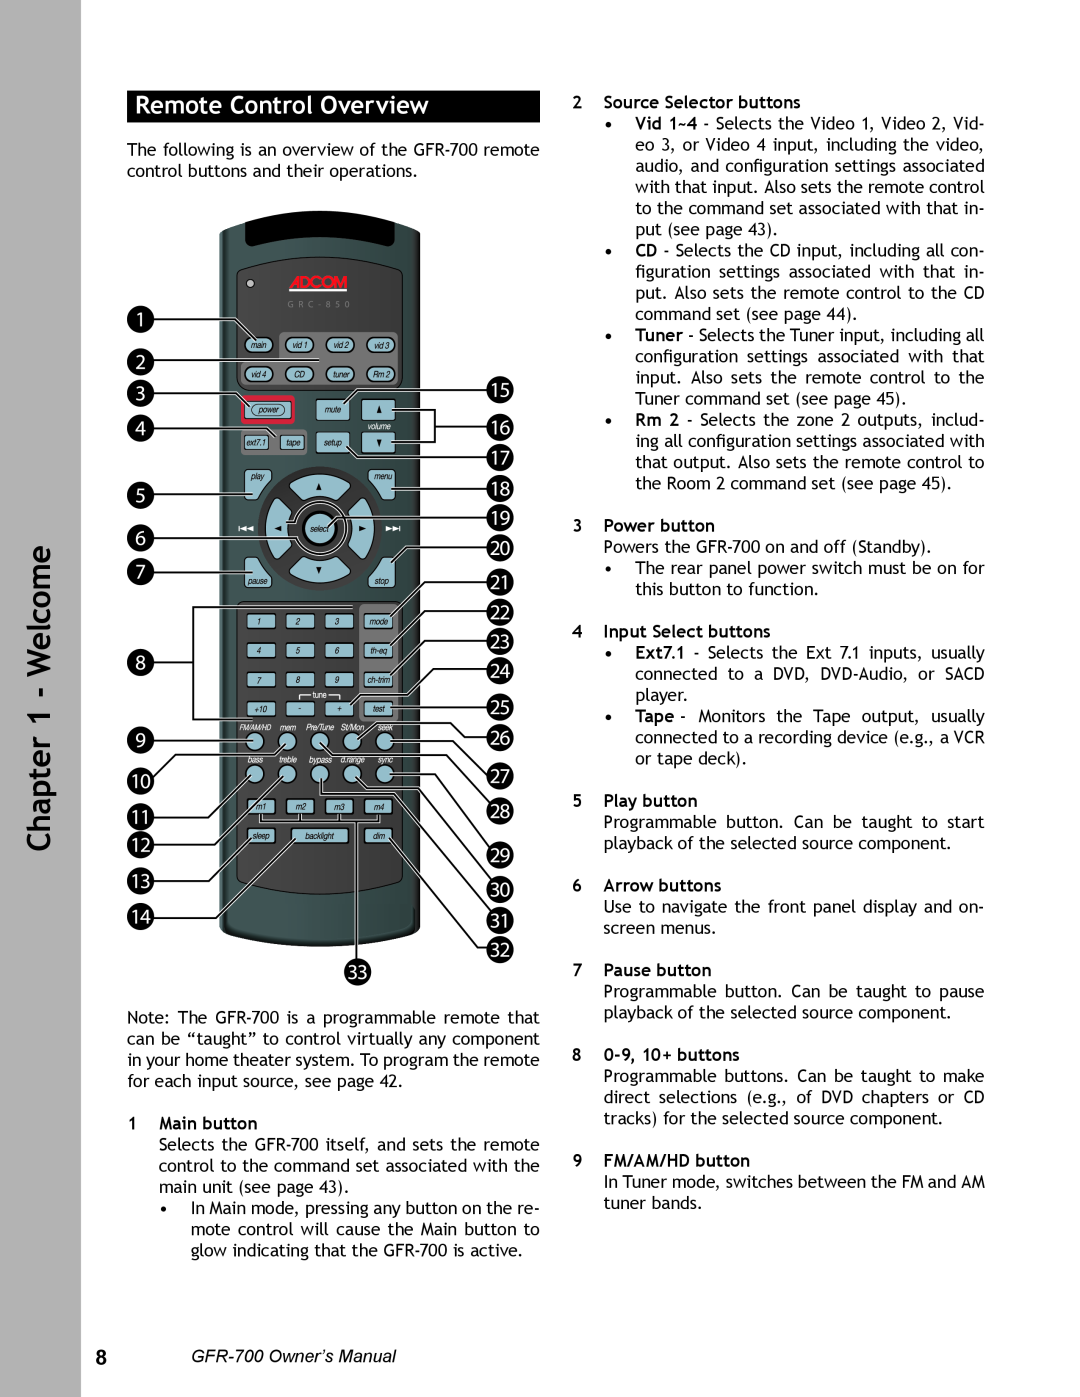 Adcom GFR-700 Remote Control Overview, 1Main button, 2Source Selector buttons, 3Power button, 4Input Select buttons 